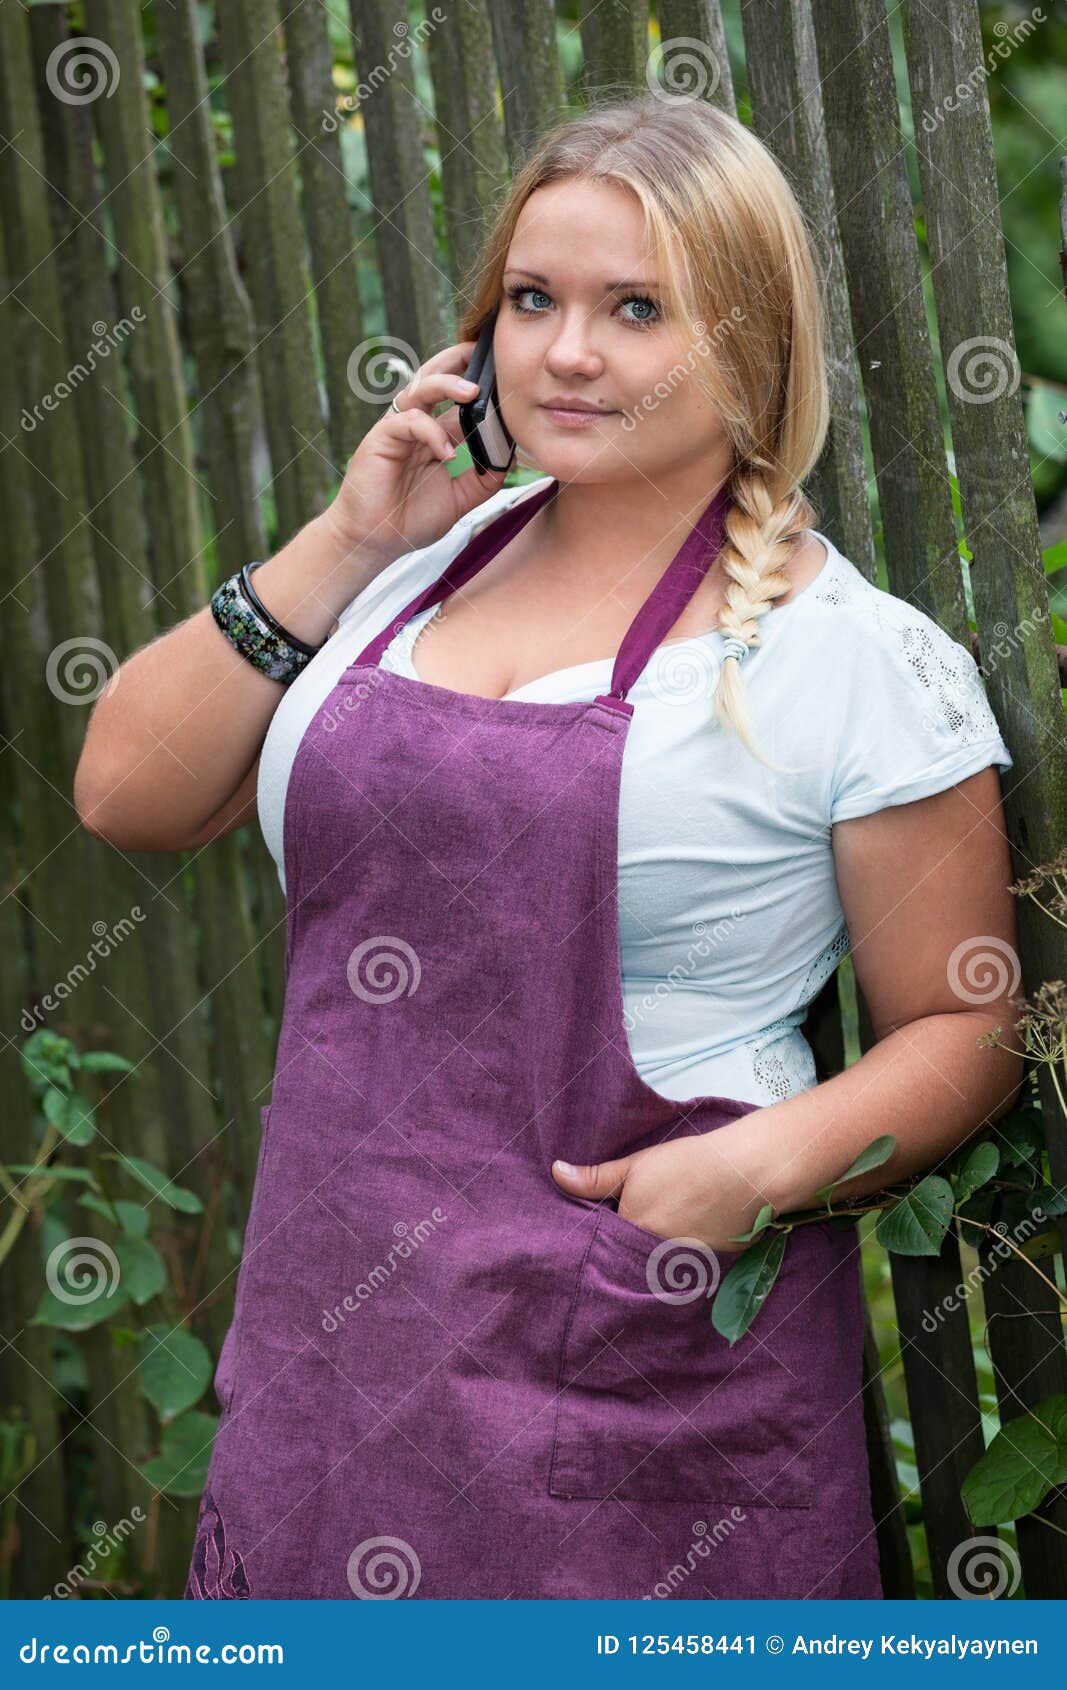 Bugsering at tiltrække skræmmende Full-figured Country Woman Holding Mobile Phone and Looking at Camera,  Standing Front of Fence Stock Image - Image of phone, country: 125458441